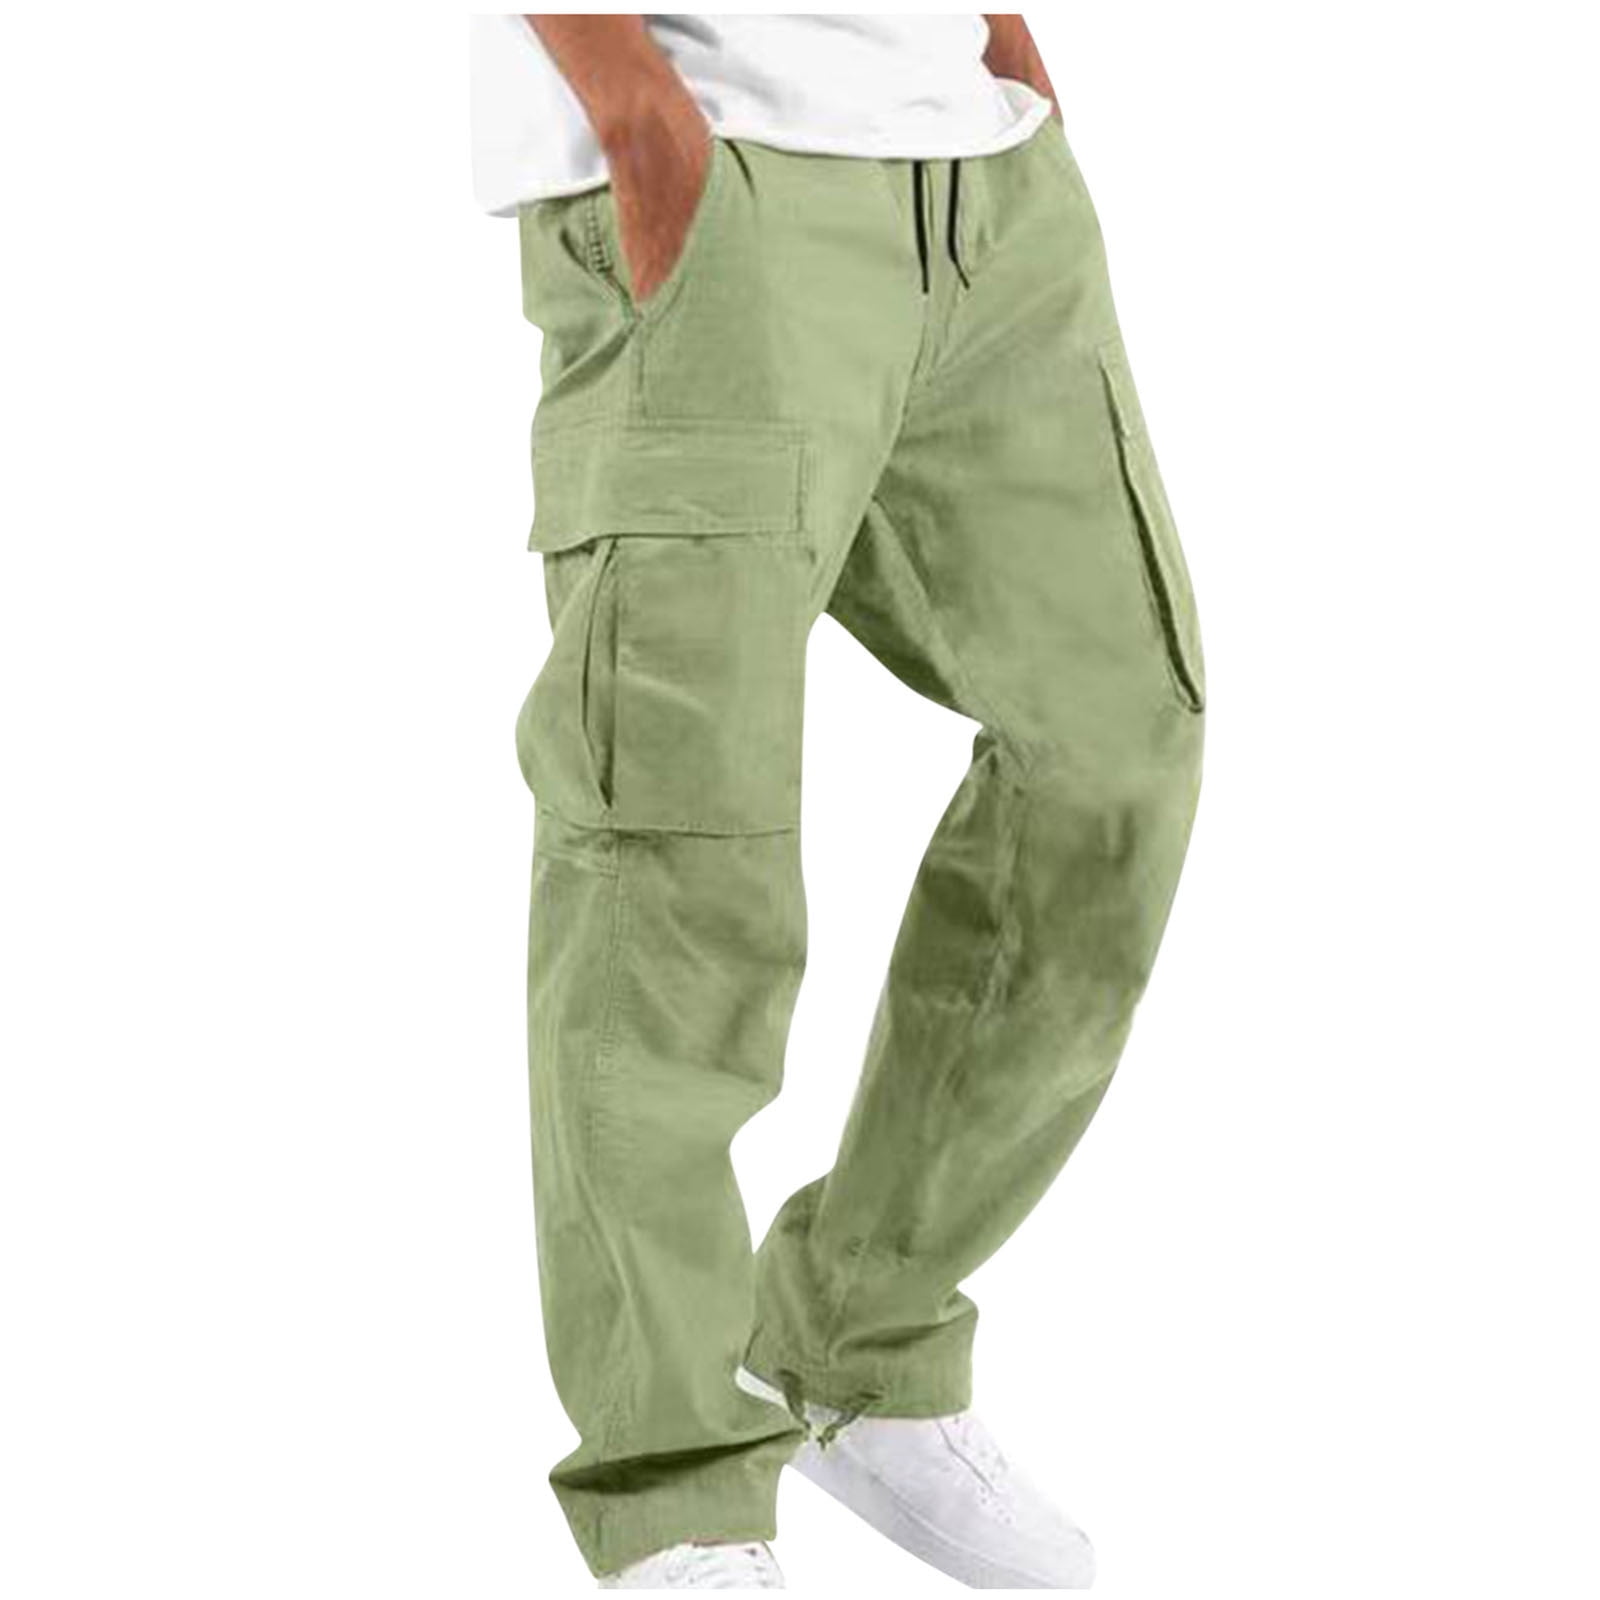 Hinvhai Mens Pants Clearance, Men Solid Multiple Pockets Outdoor ...